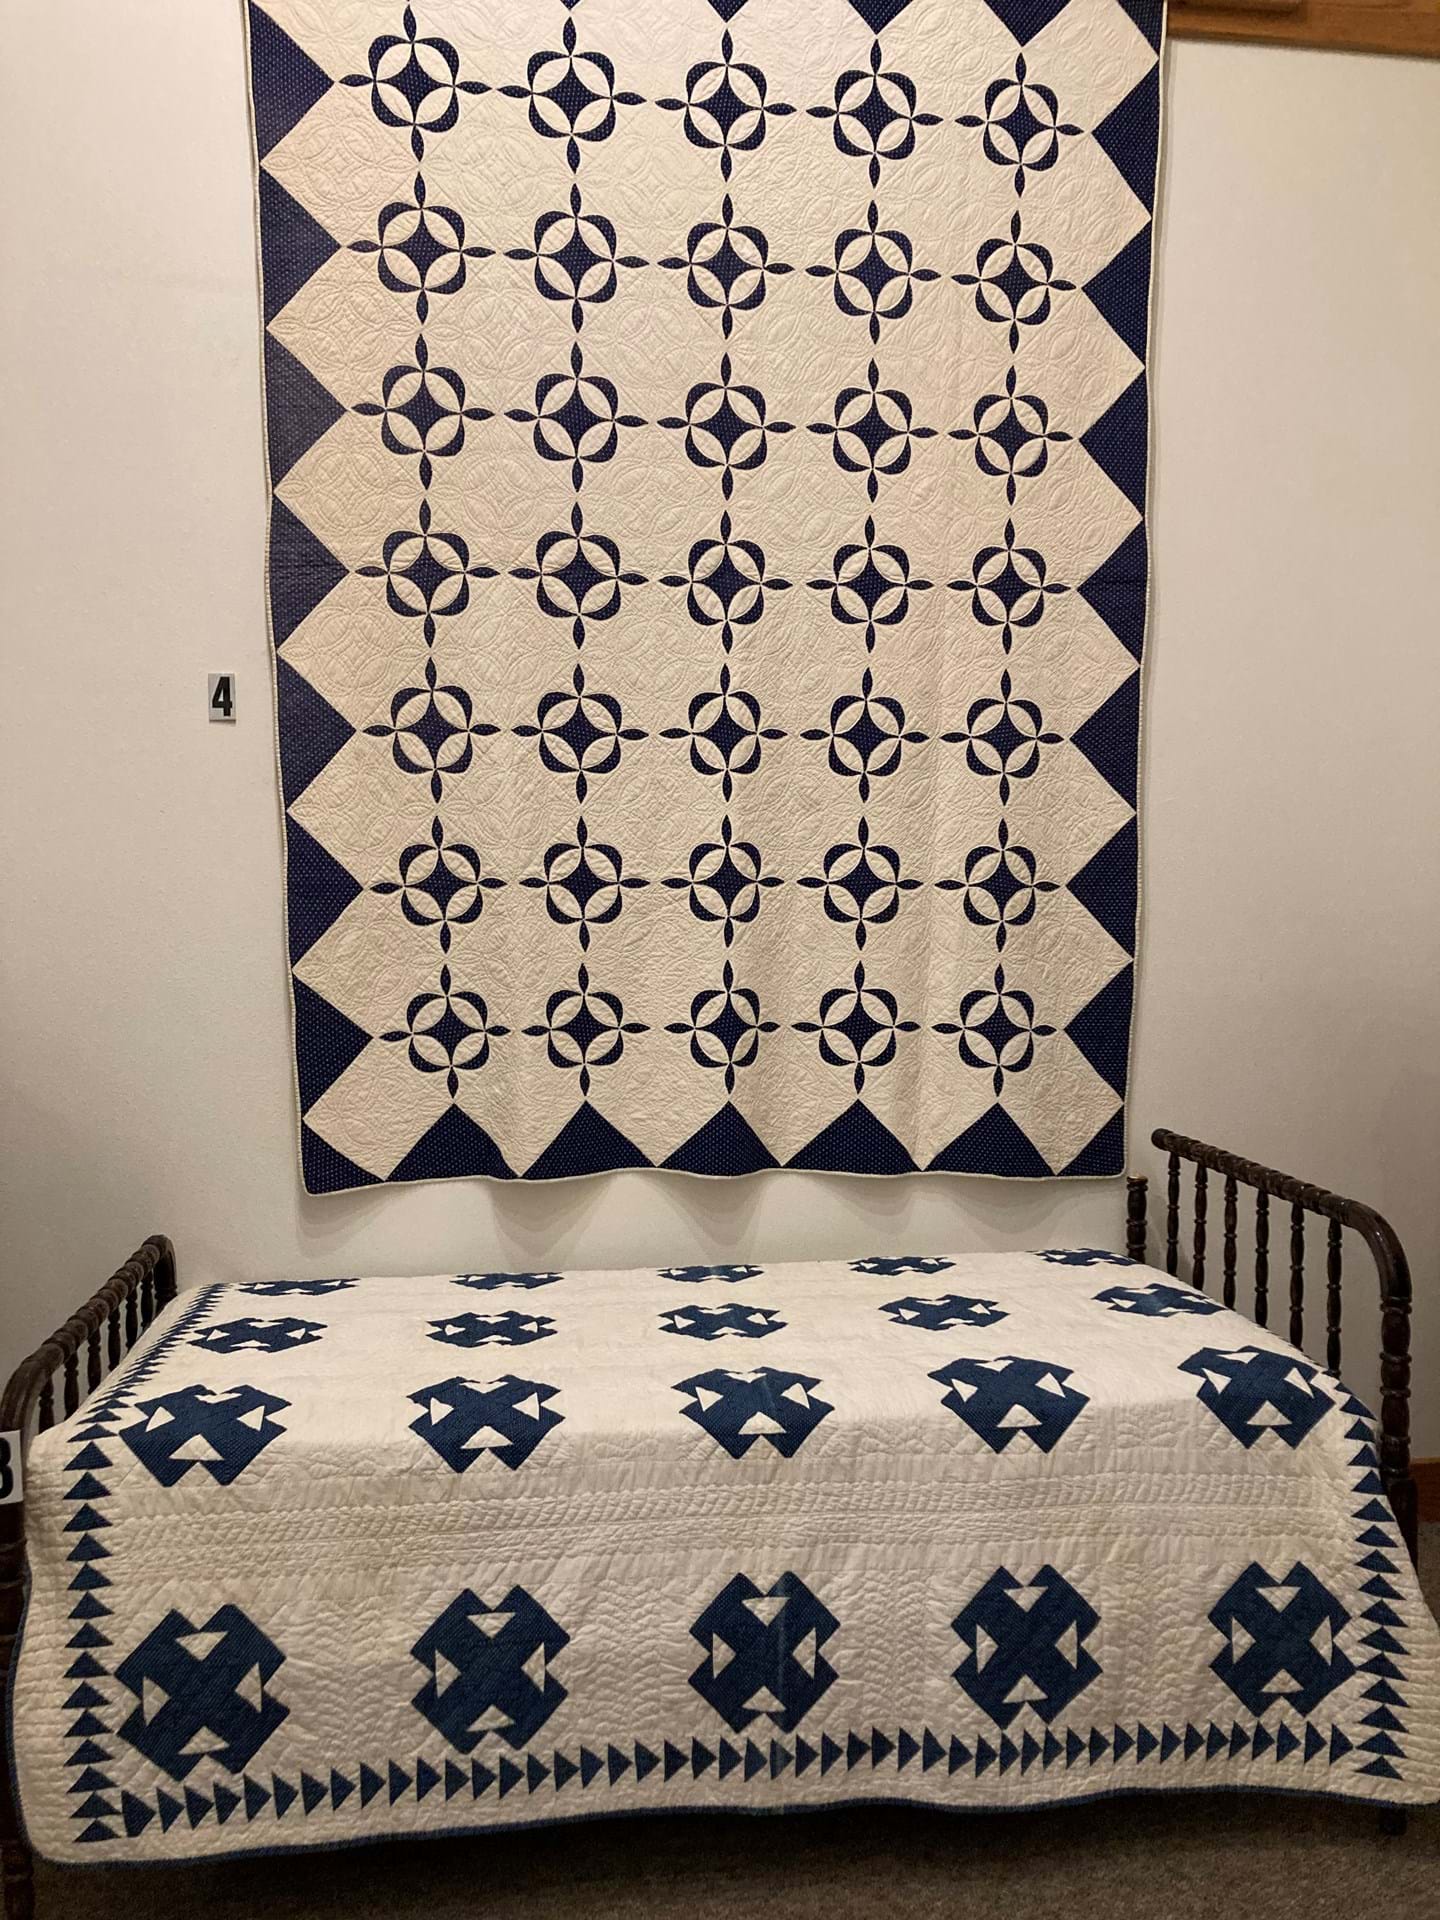 Late 1800's Blue and White Quilt exhibit